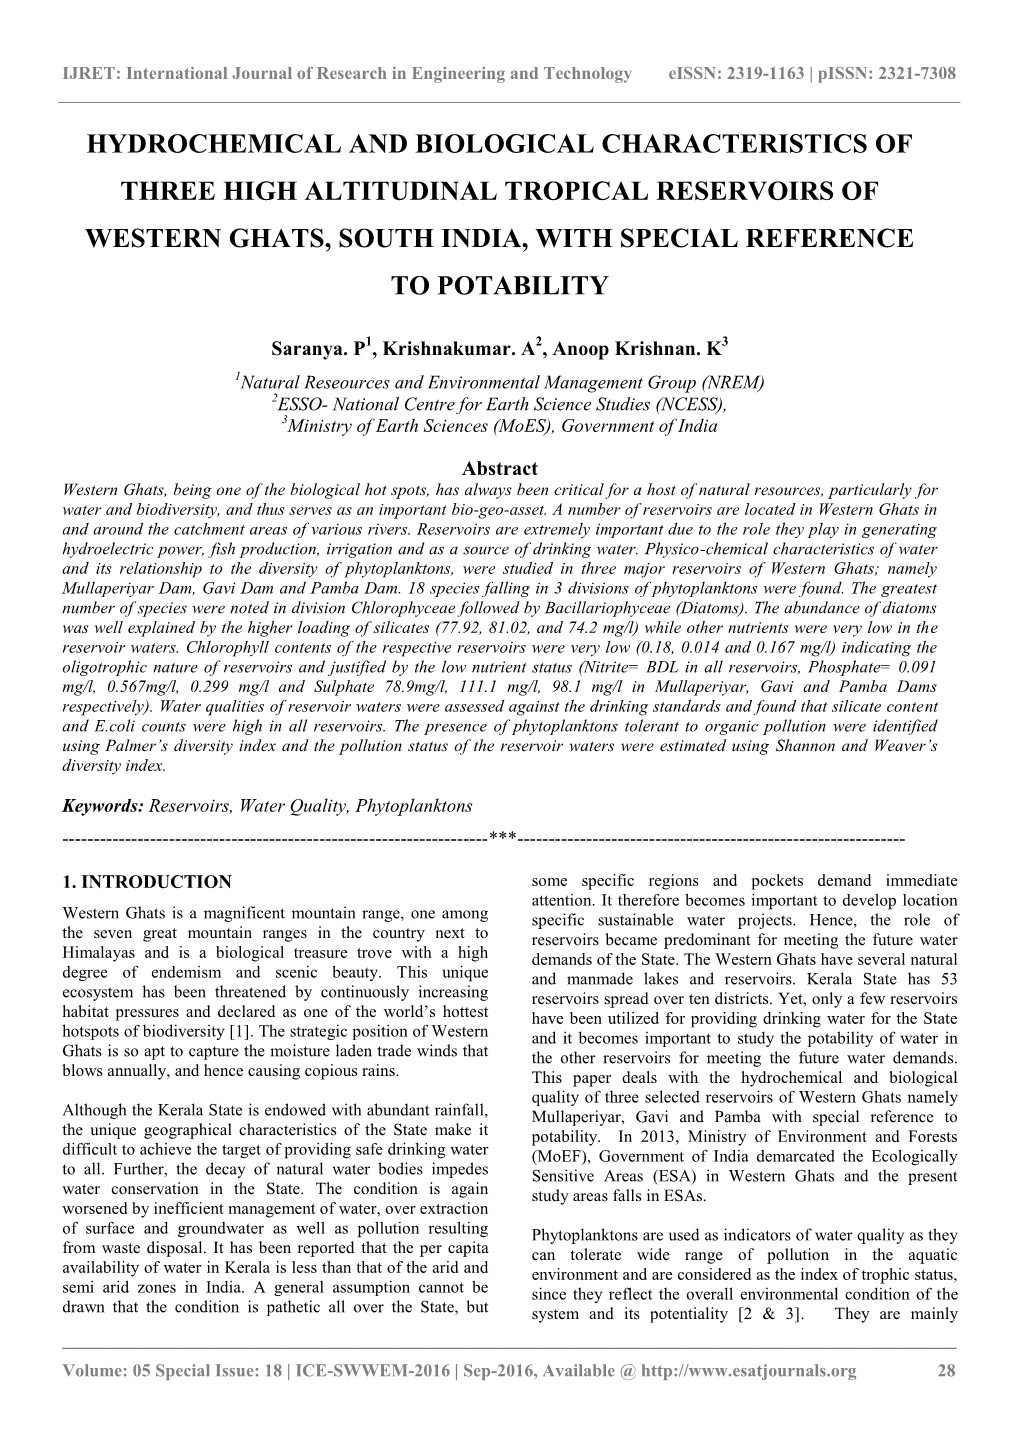 Hydrochemical and Biological Characteristics of Three High Altitudinal Tropical Reservoirs of Western Ghats, South India, with Special Reference to Potability